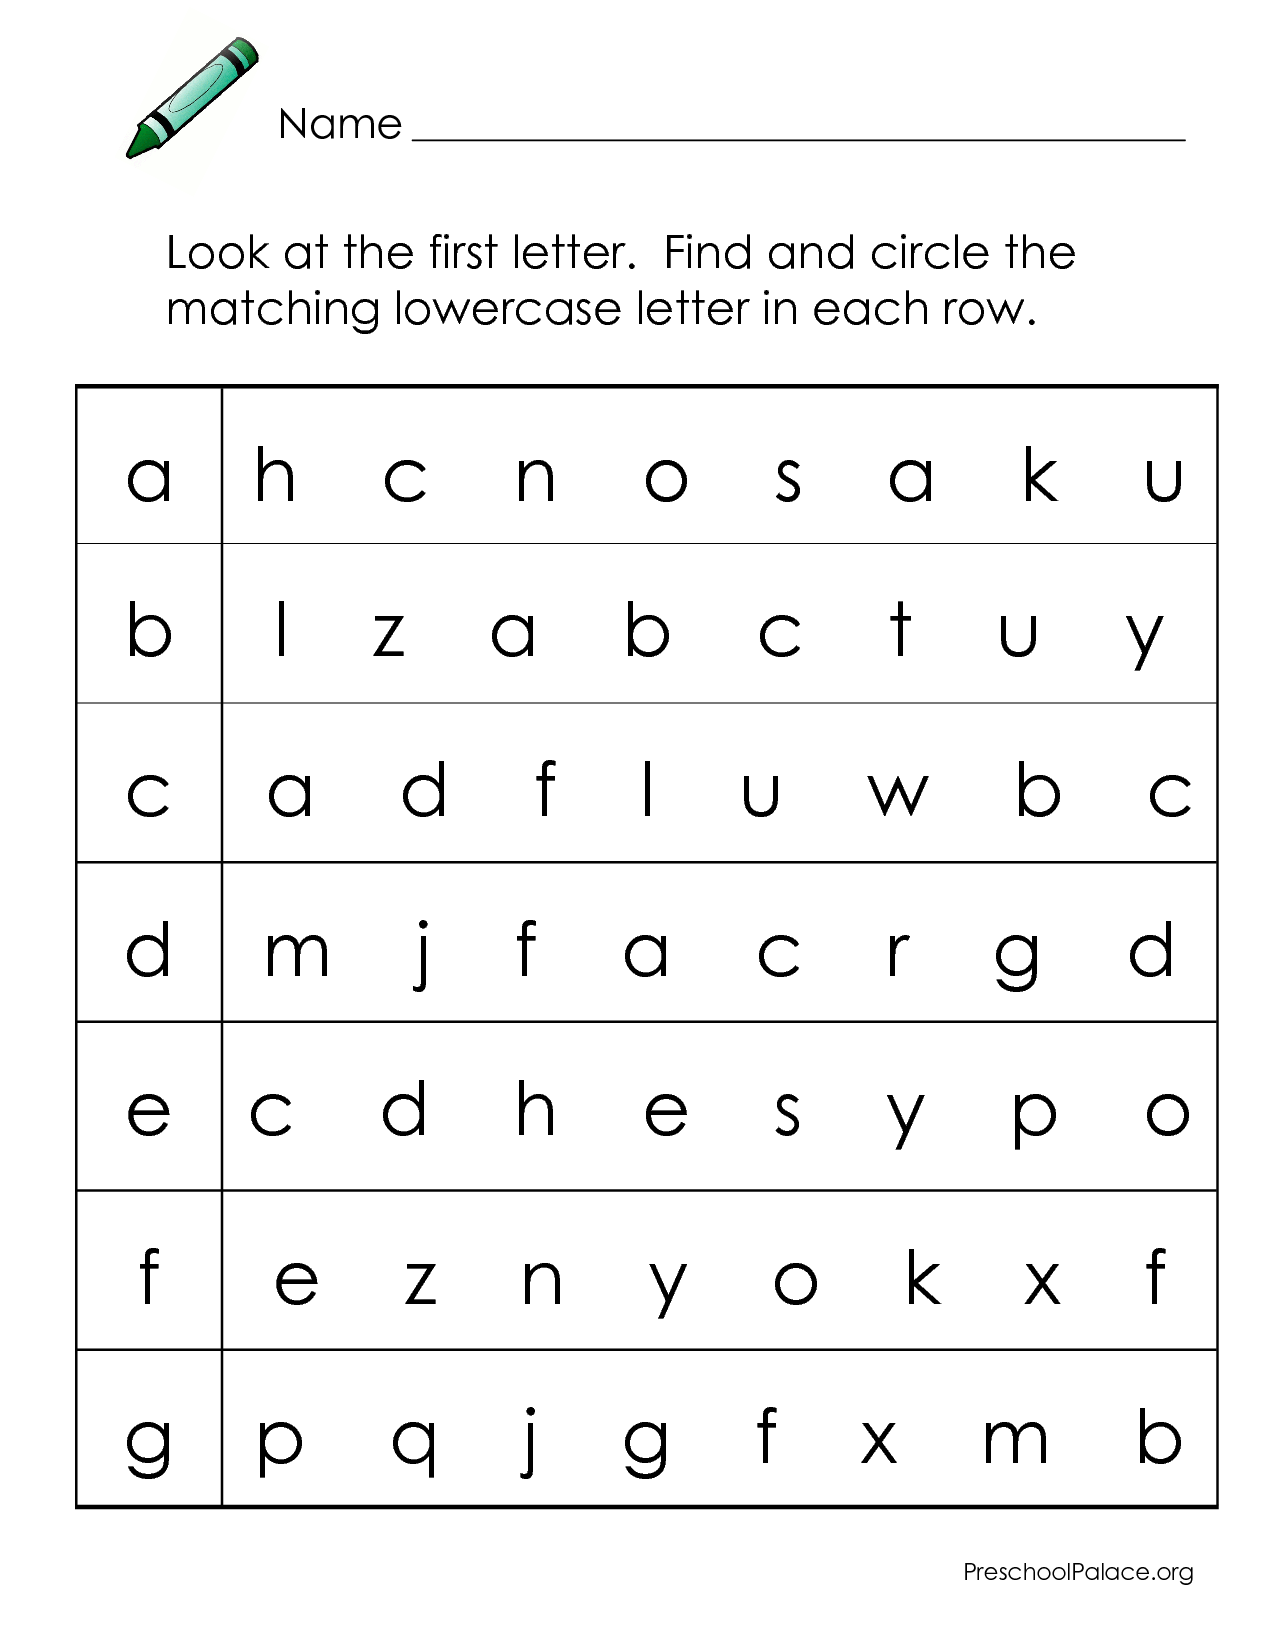 Abcs - Letter Matching A-G Lowercase | Letter Recognition within Alphabet Recognition Worksheets Printable